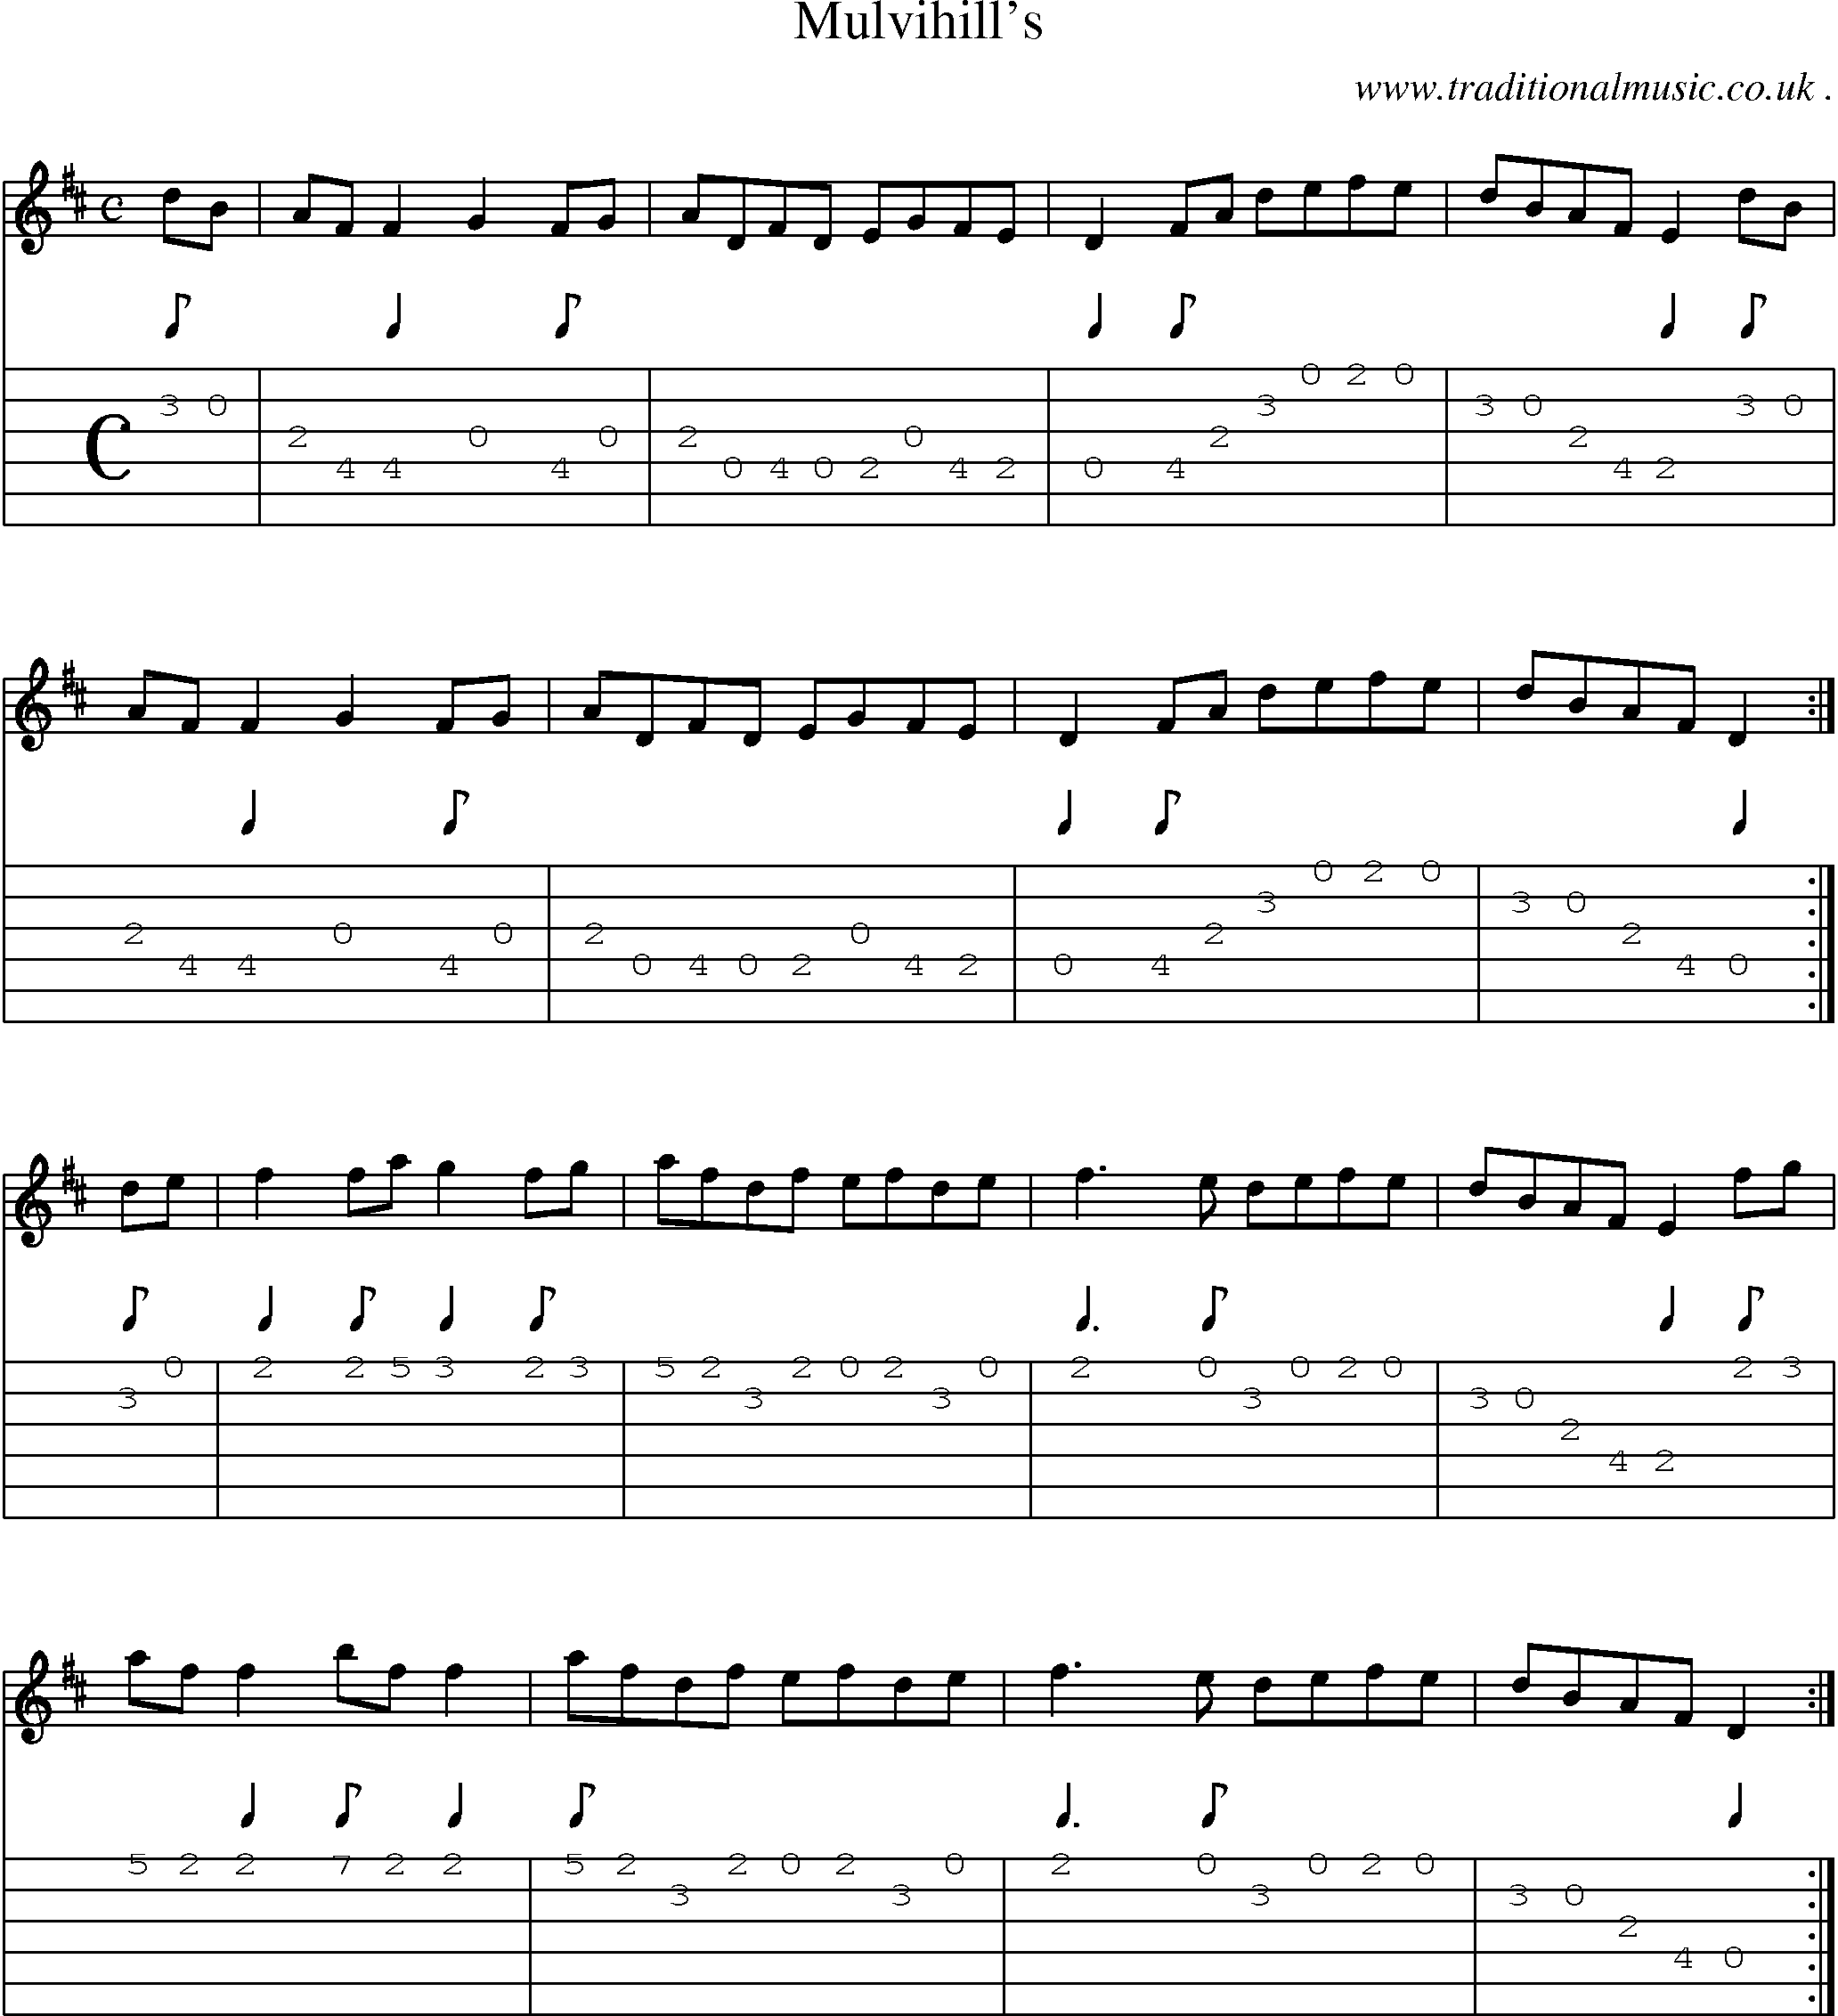 Sheet-Music and Guitar Tabs for Mulvihills